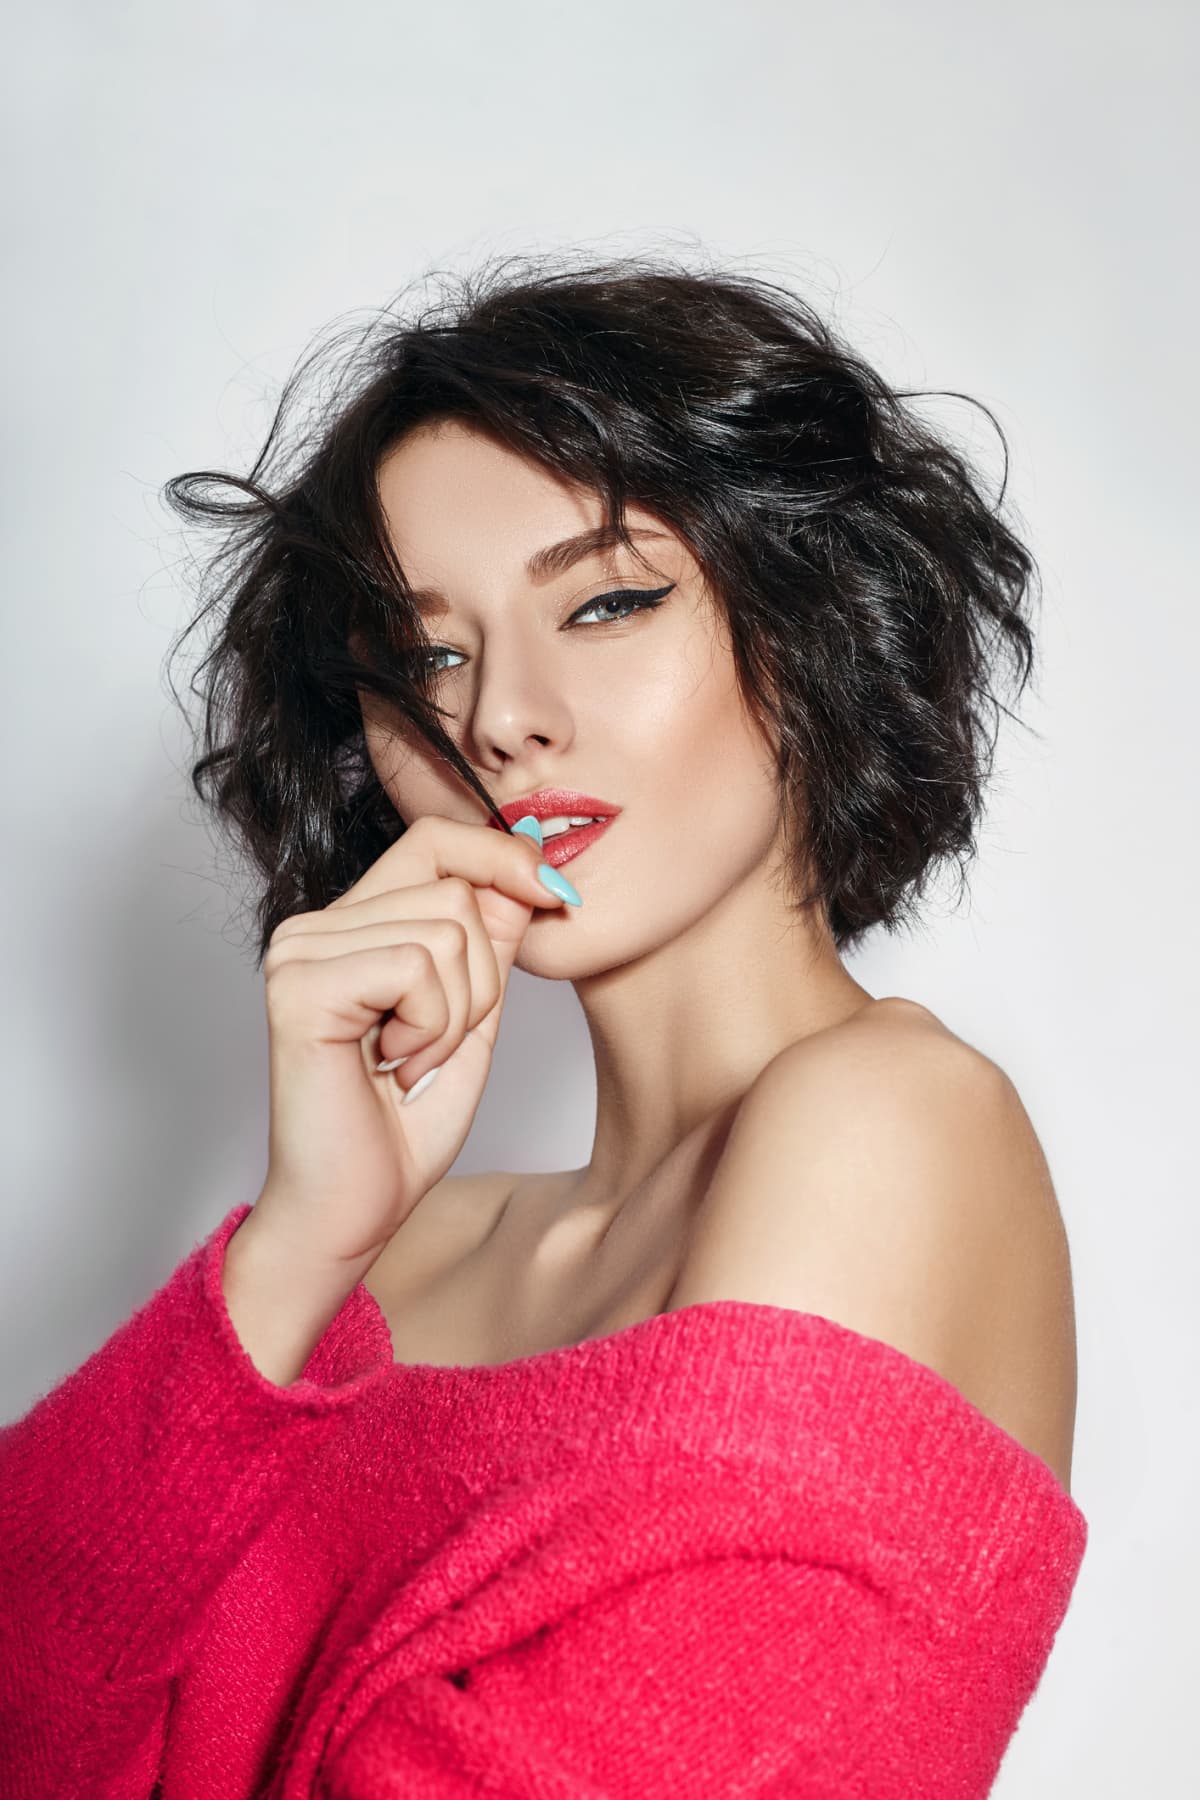 woman with short hair. Girl posing in a red sweater on a white background. Perfect clean skin, sexy Nude body of brunette woman. Skin rejuvenation and hydration